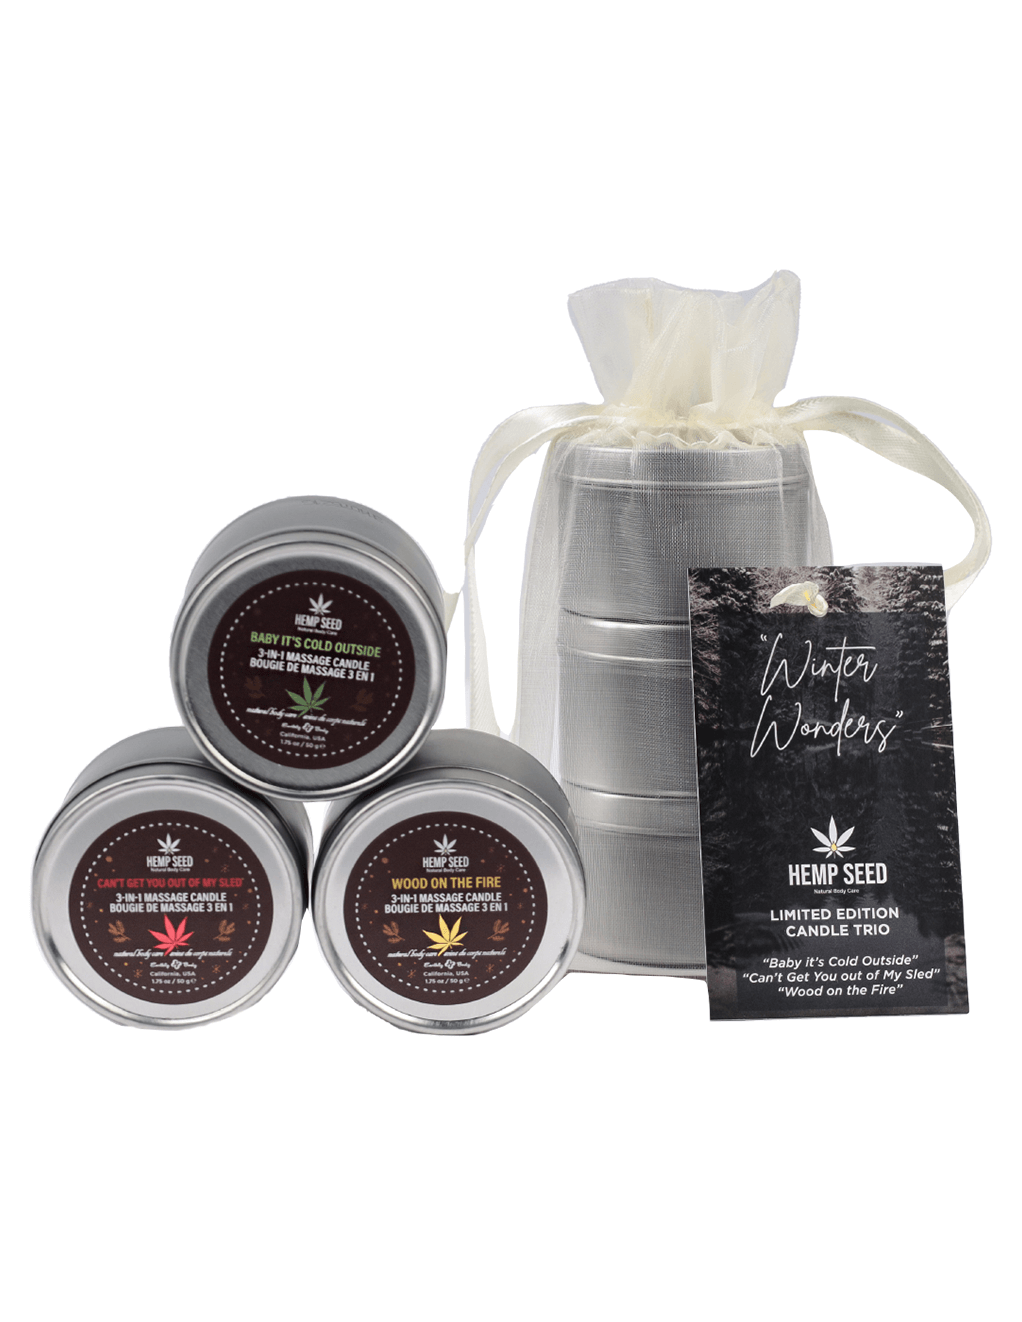 Hemp Seed Holiday Massage Candle Trio - Product With Package